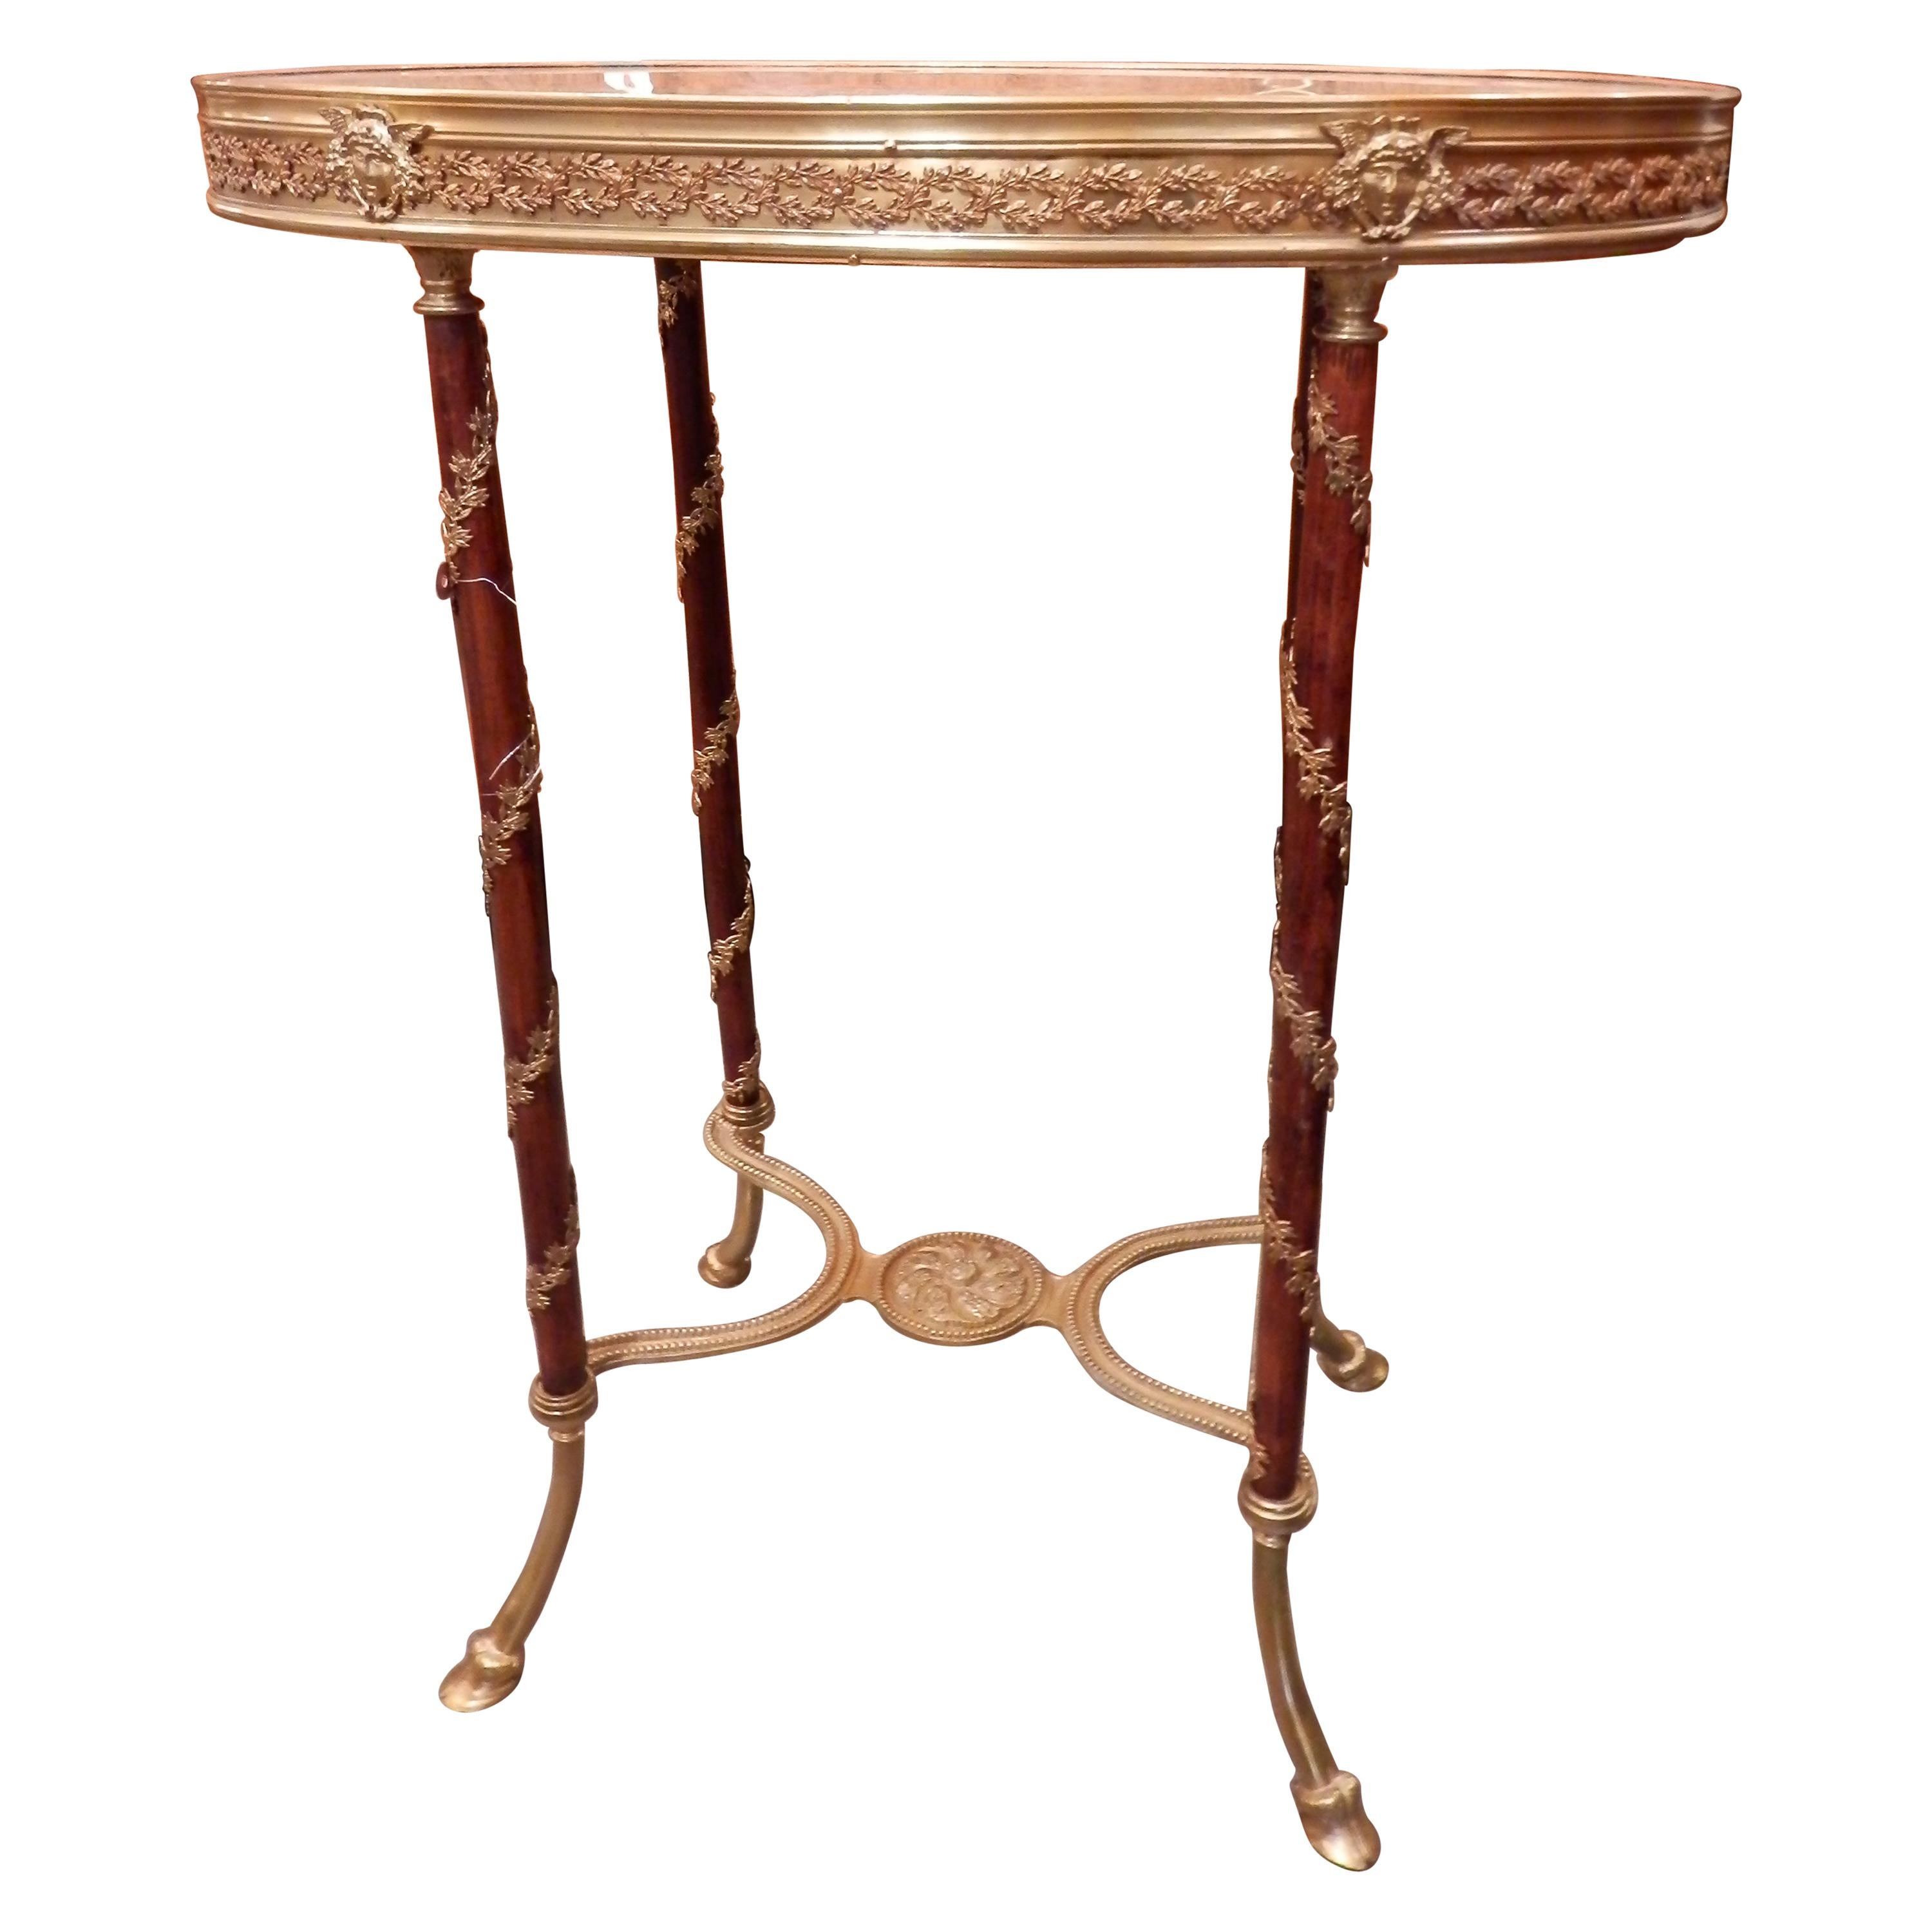 19th Century Fine French Gilt Bronze and Marble-Top Guéridon Table For Sale